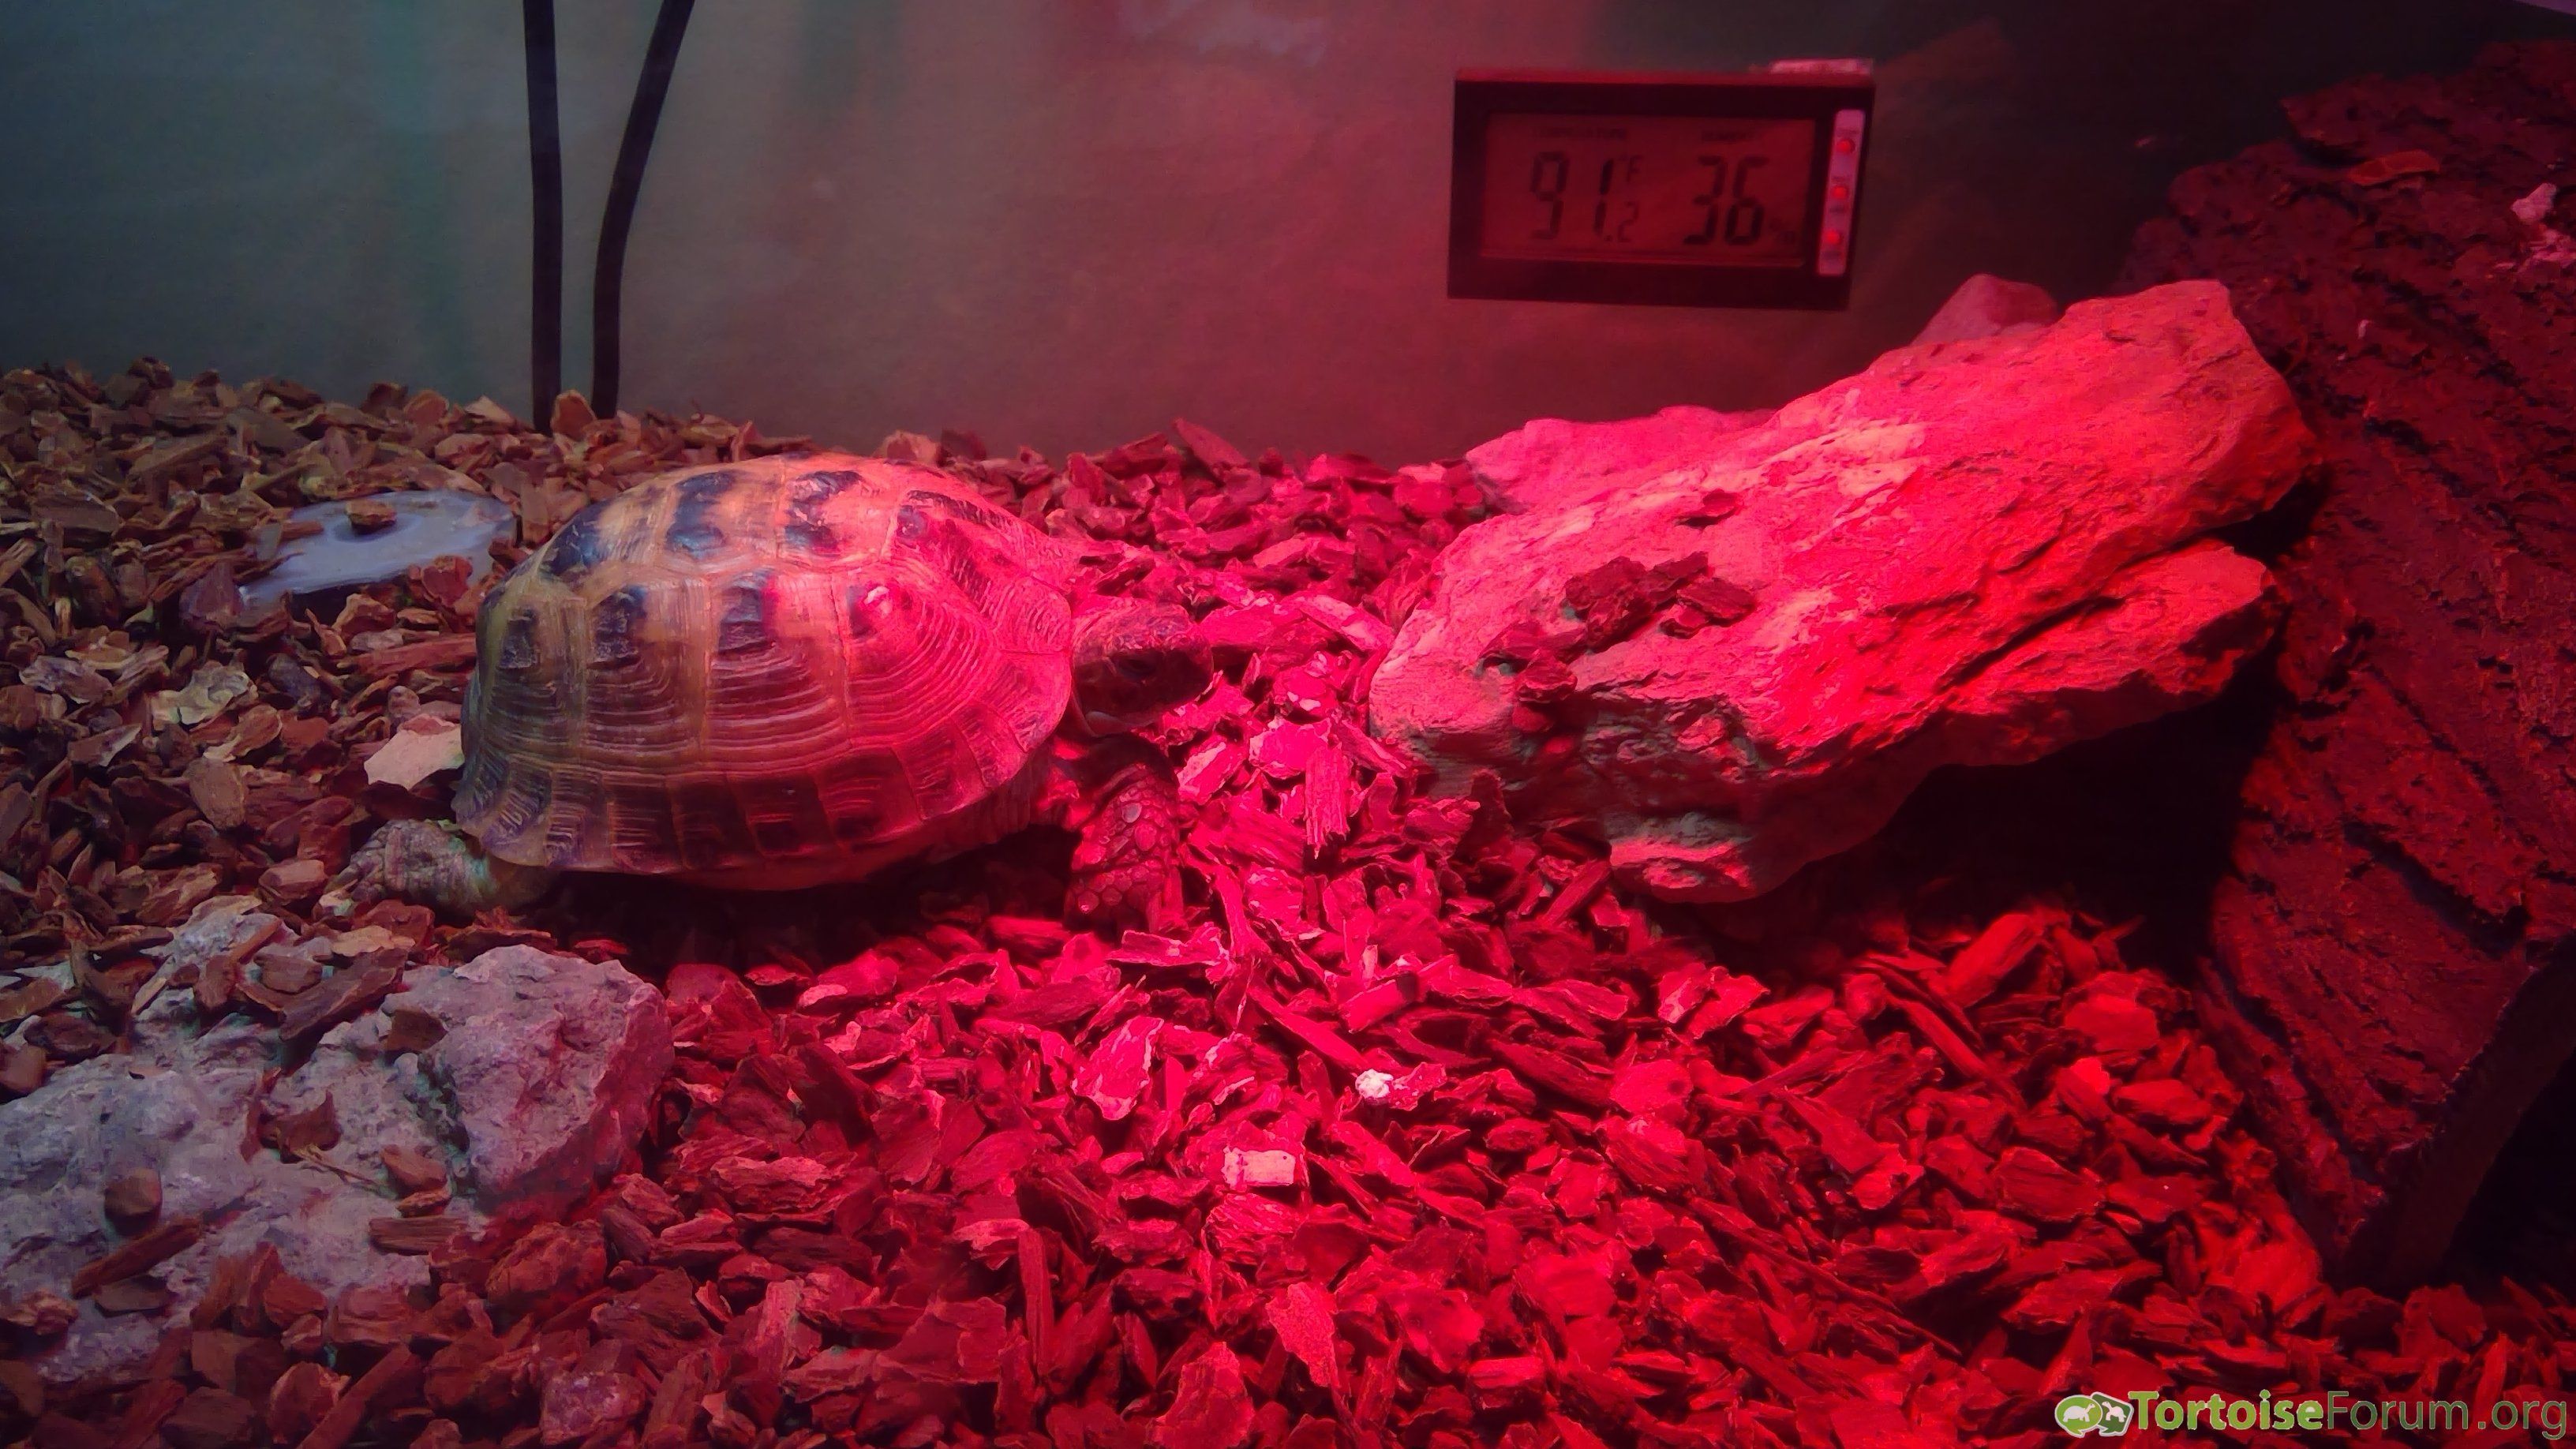 am i the only one with a tortoise who sleeps all the time?